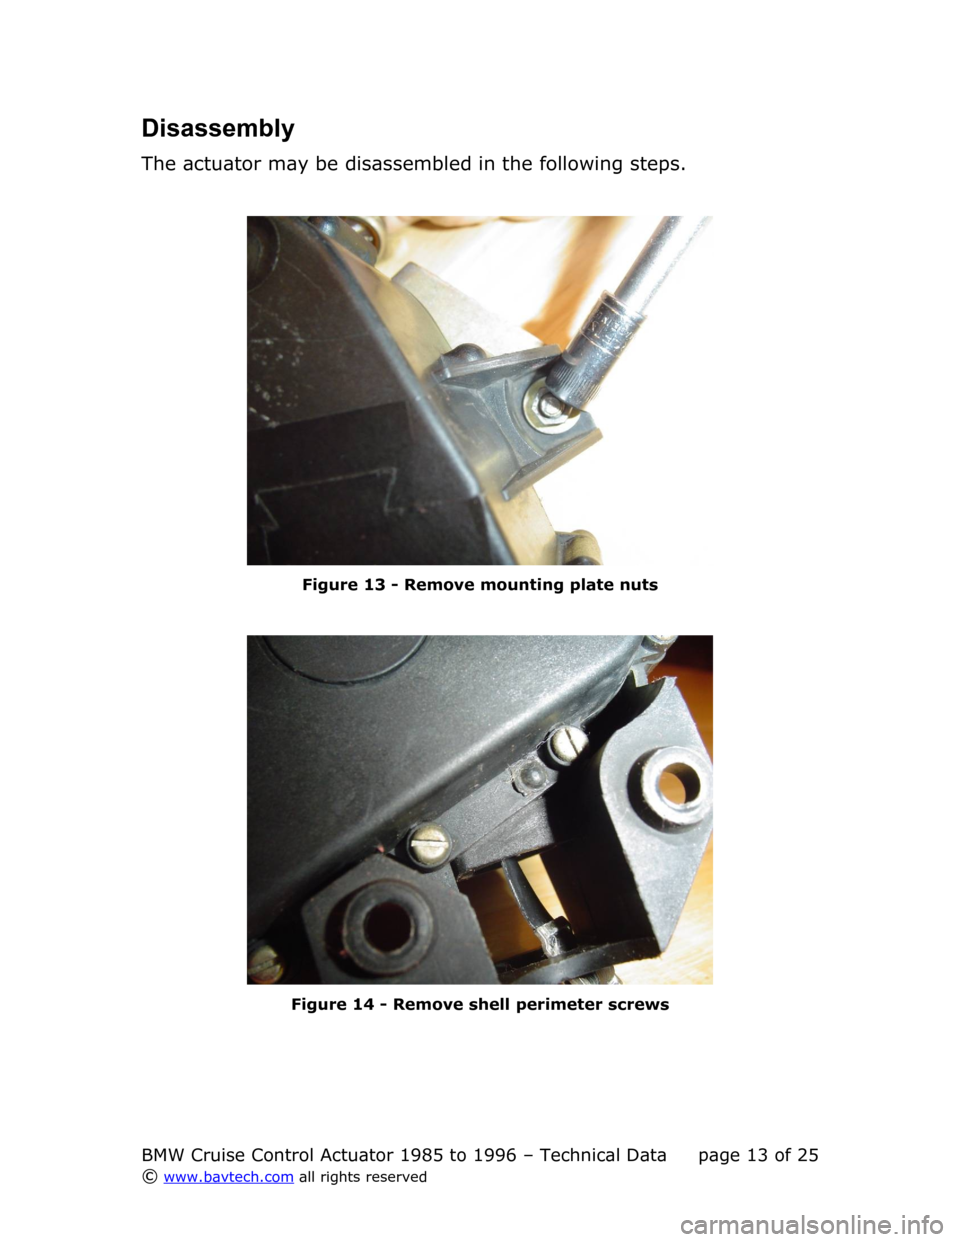 BMW 5 SERIES 1994 E34 Cruise Control Acutator Disassembly
The actuator may be disassembled in the following steps.
Figure  13  - Remove mounting plate nuts
Figure  14  - Remove shell perimeter screws
BMW Cruise Control Actuator 1985 to 1996 – T